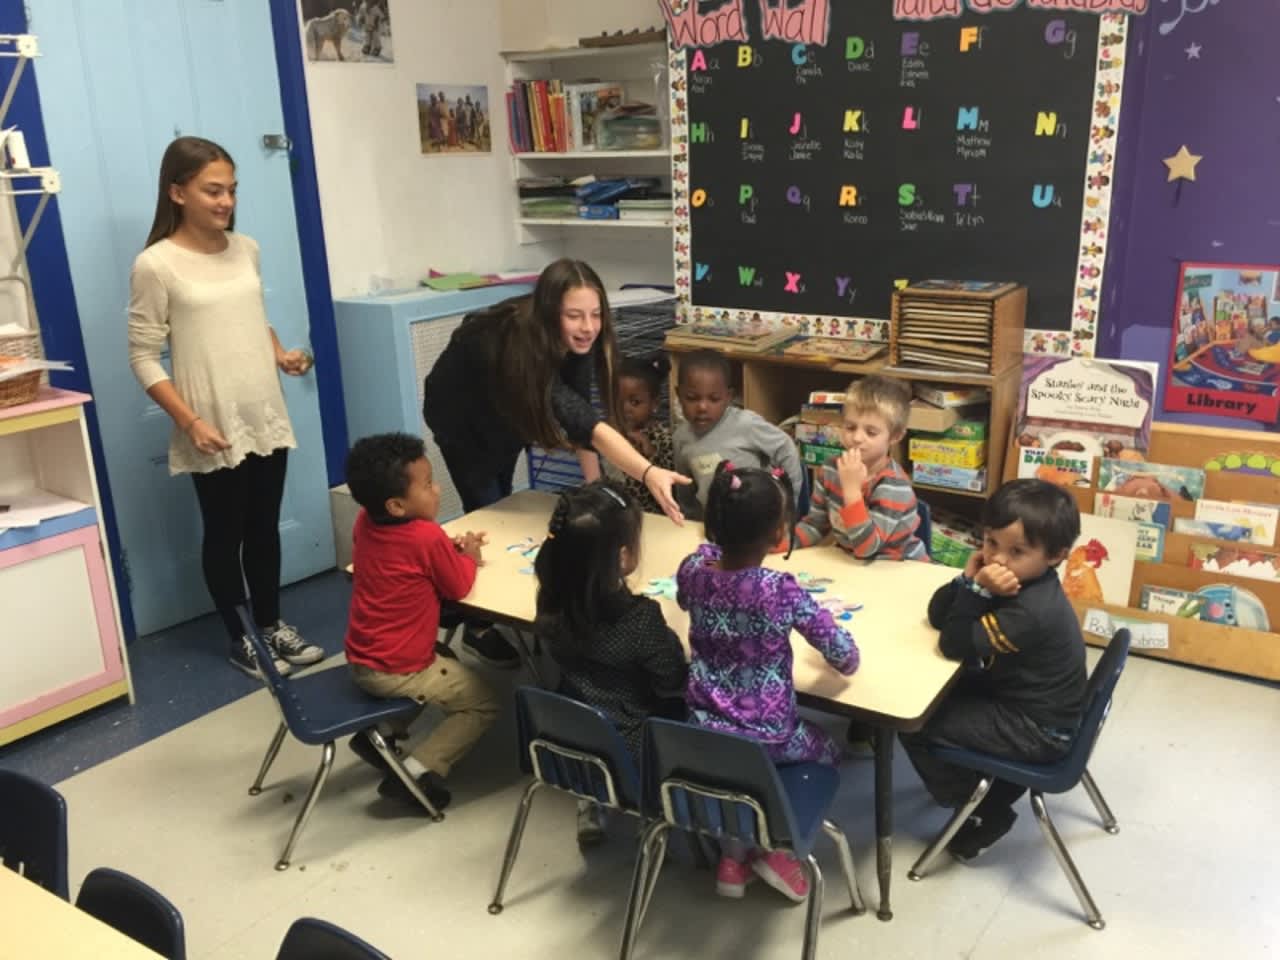 Seventh-grade Spanish and French classes are volunteering at the Ossining Children’s Center once a month, where they are reading stories in the languages they are studying to the preschool children.